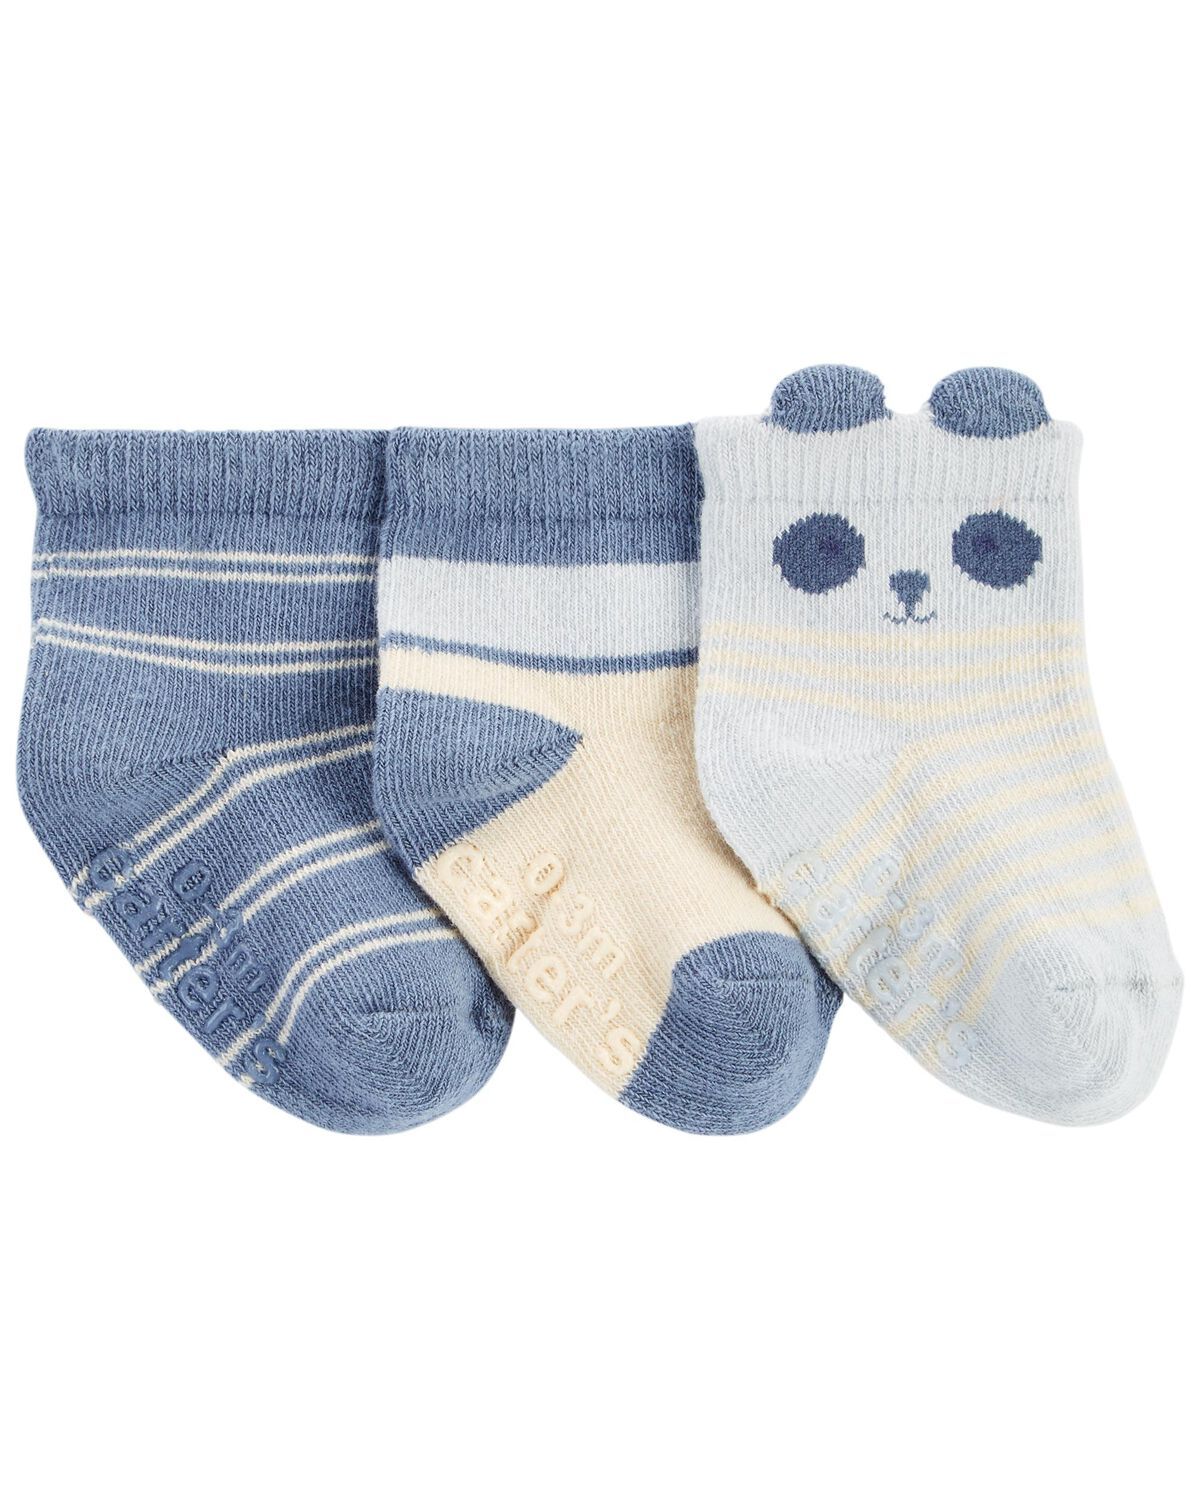 Blue/White Baby 3-Pack Panda Booties | carters.com | Carter's